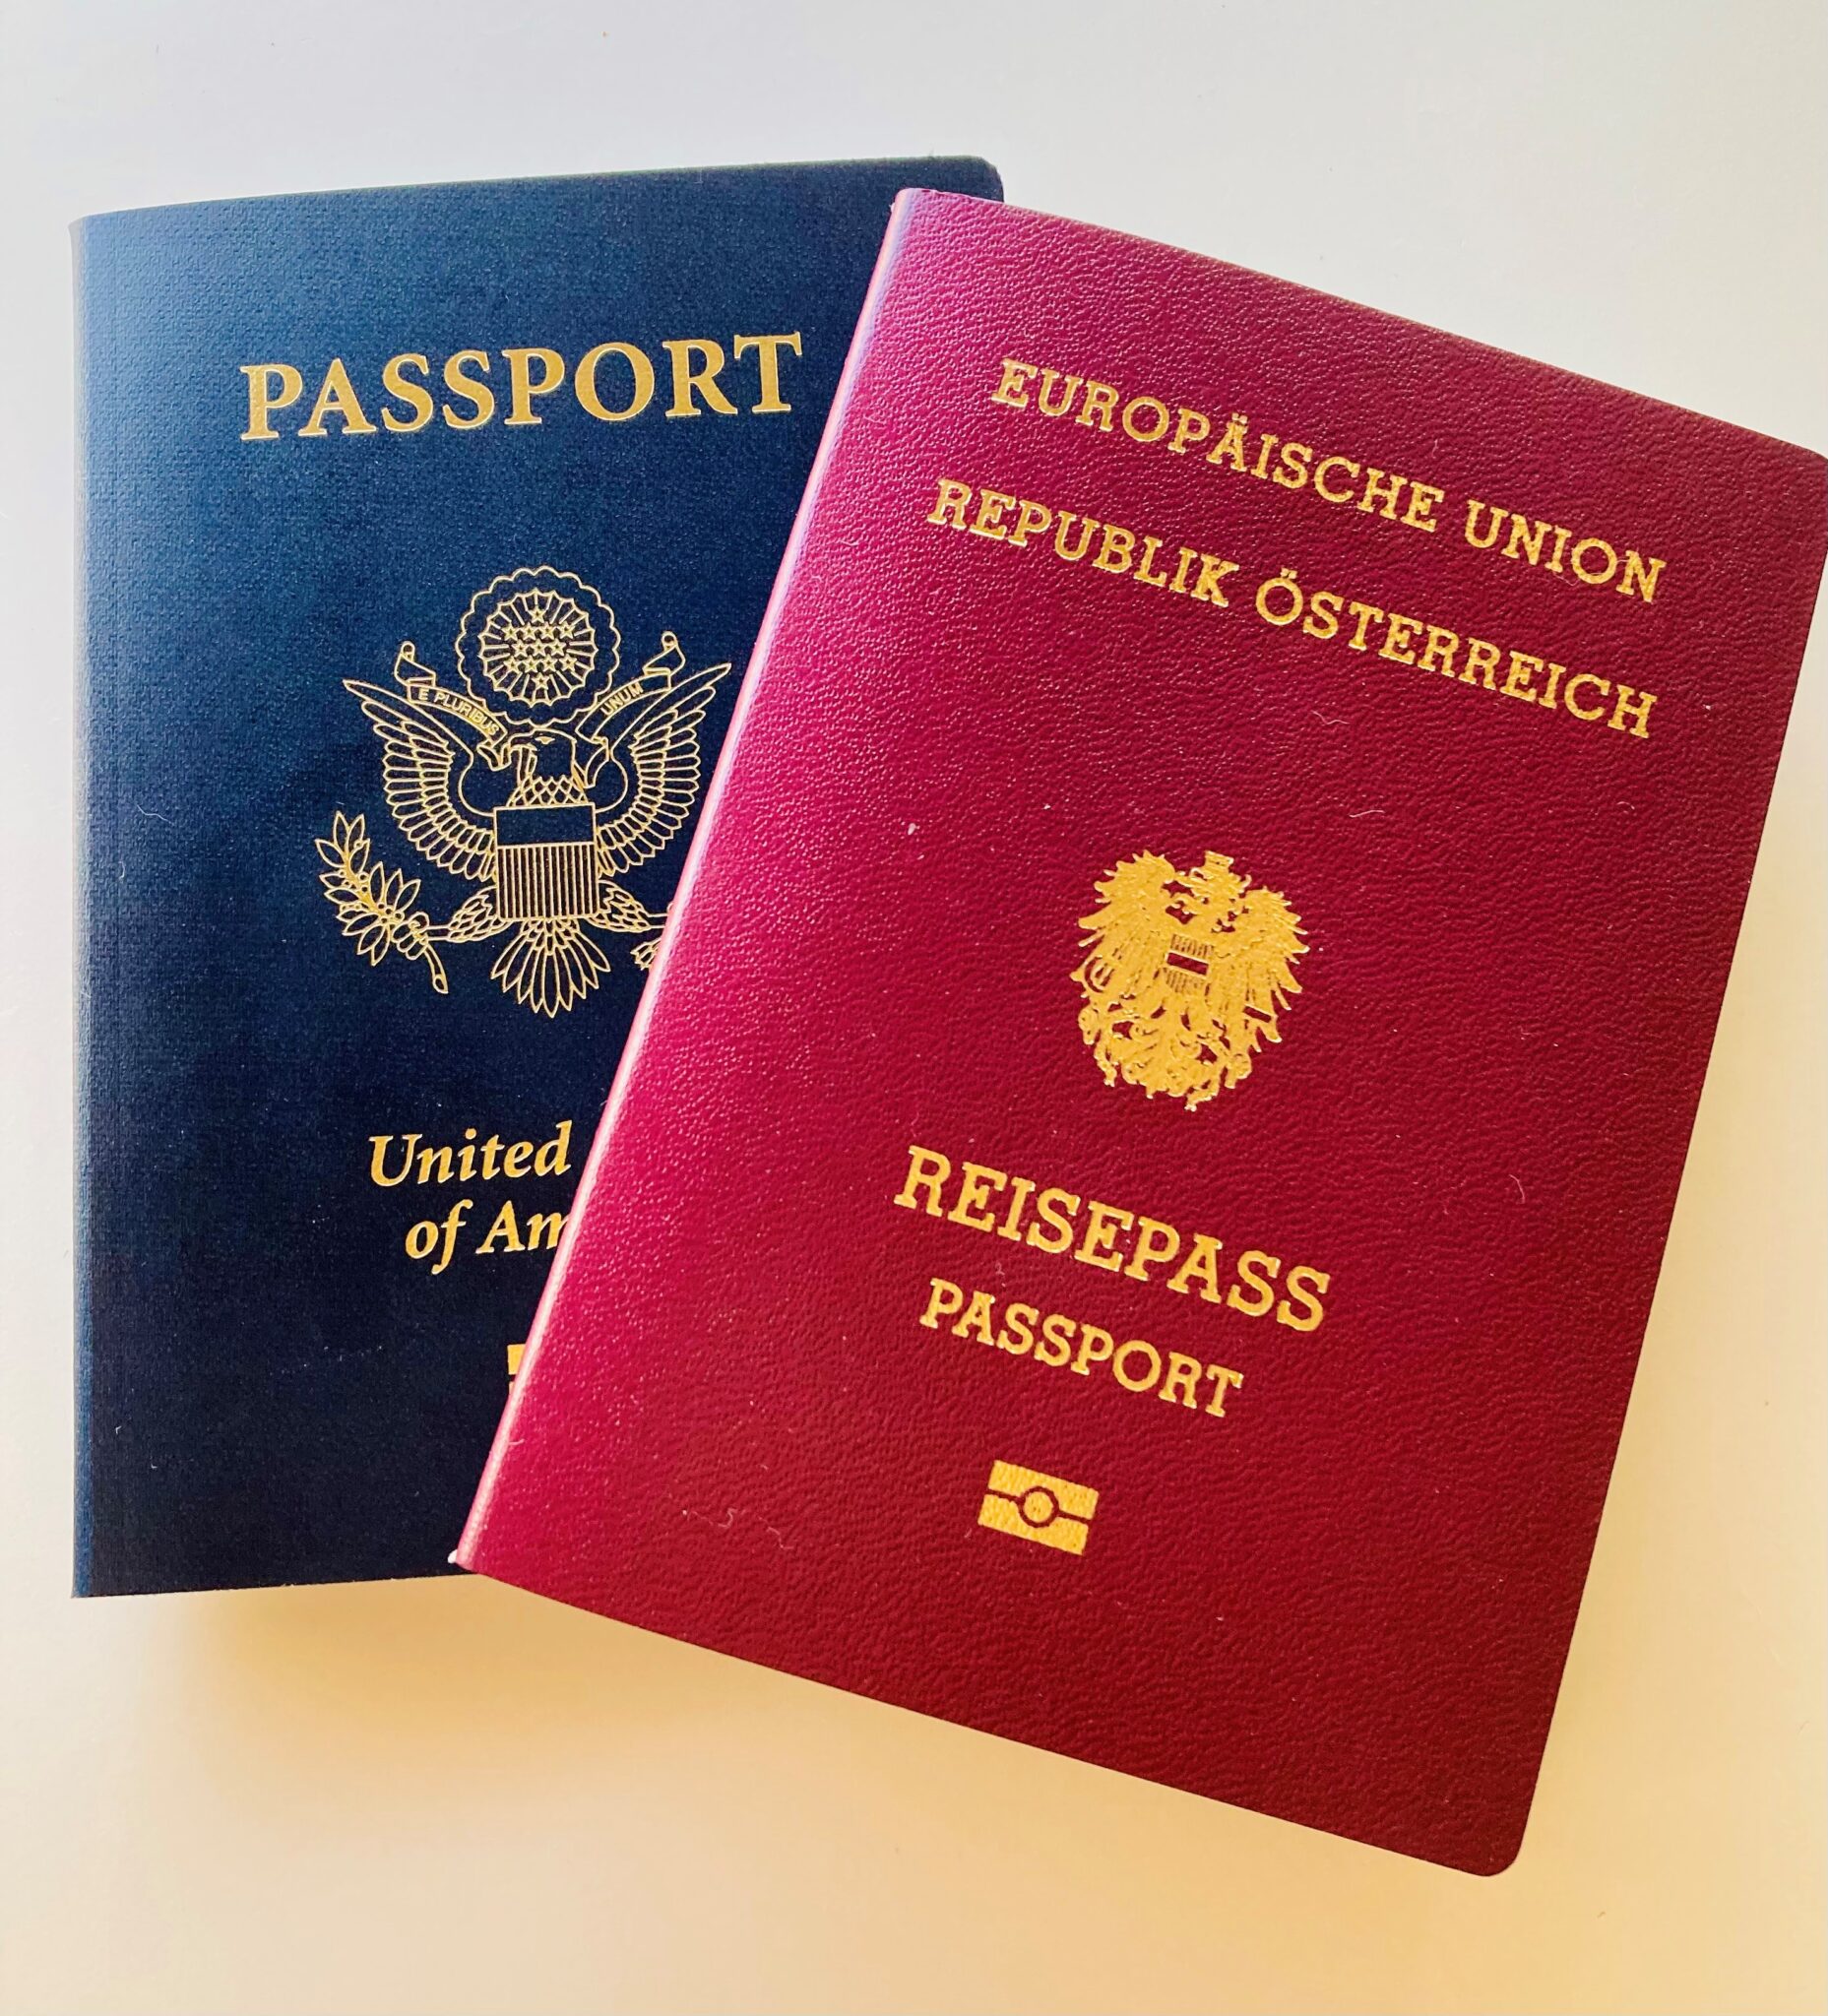 A tale of two passports… Never let anybody tell you NO!